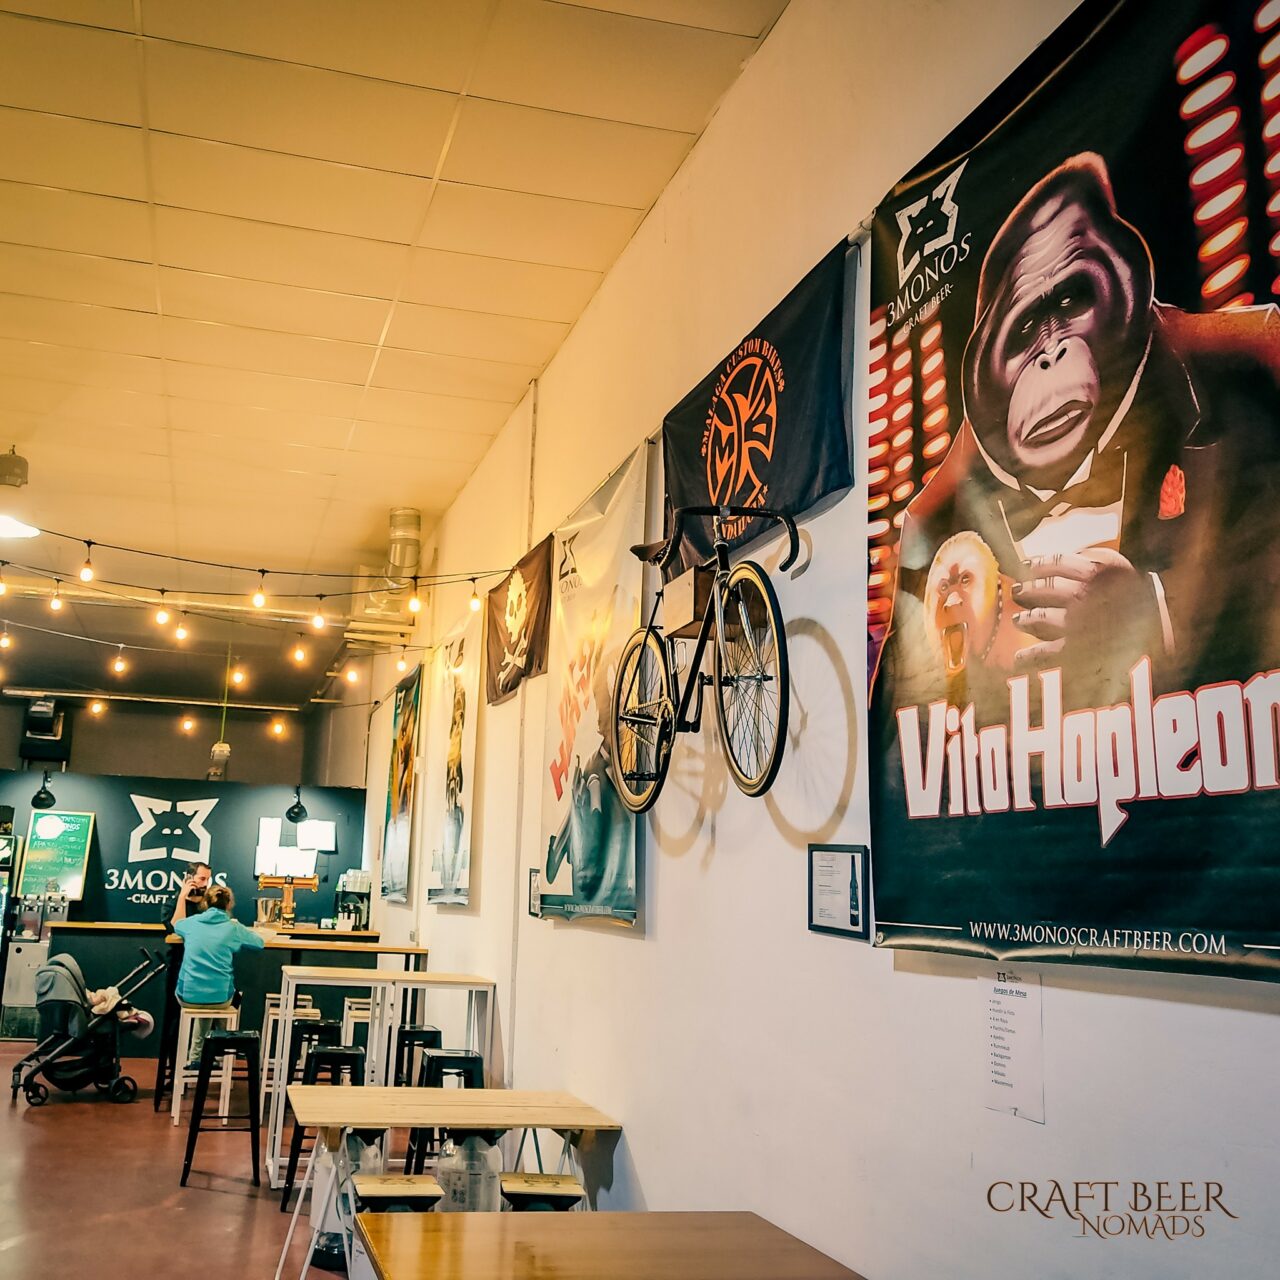 3Monos | Craft beer in Malaga in Andalusia, Spain | Craft Beer Nomads blog